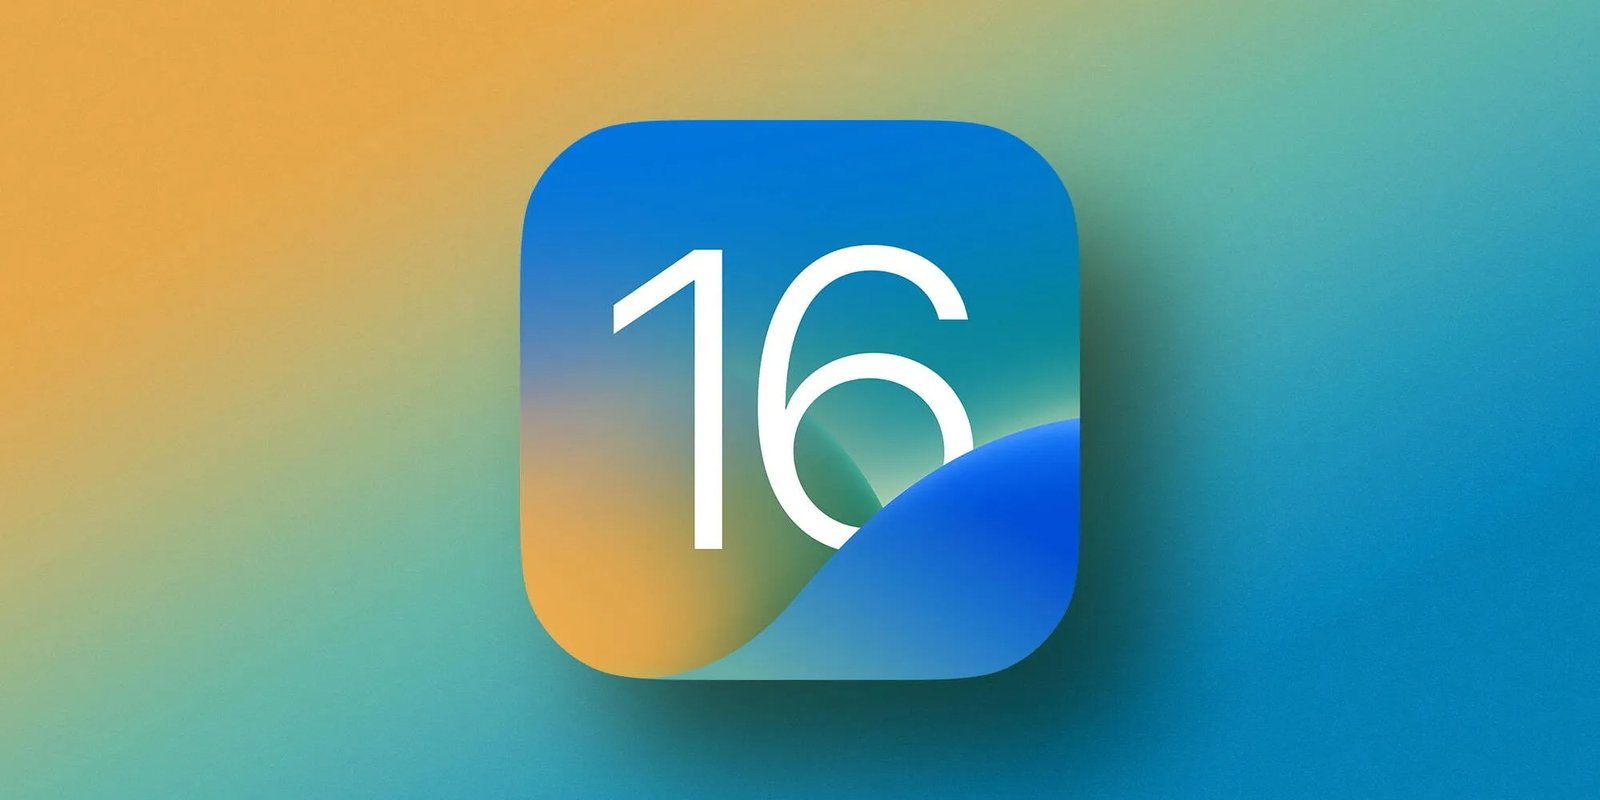 iOS 16.3.1 update for iPhone users